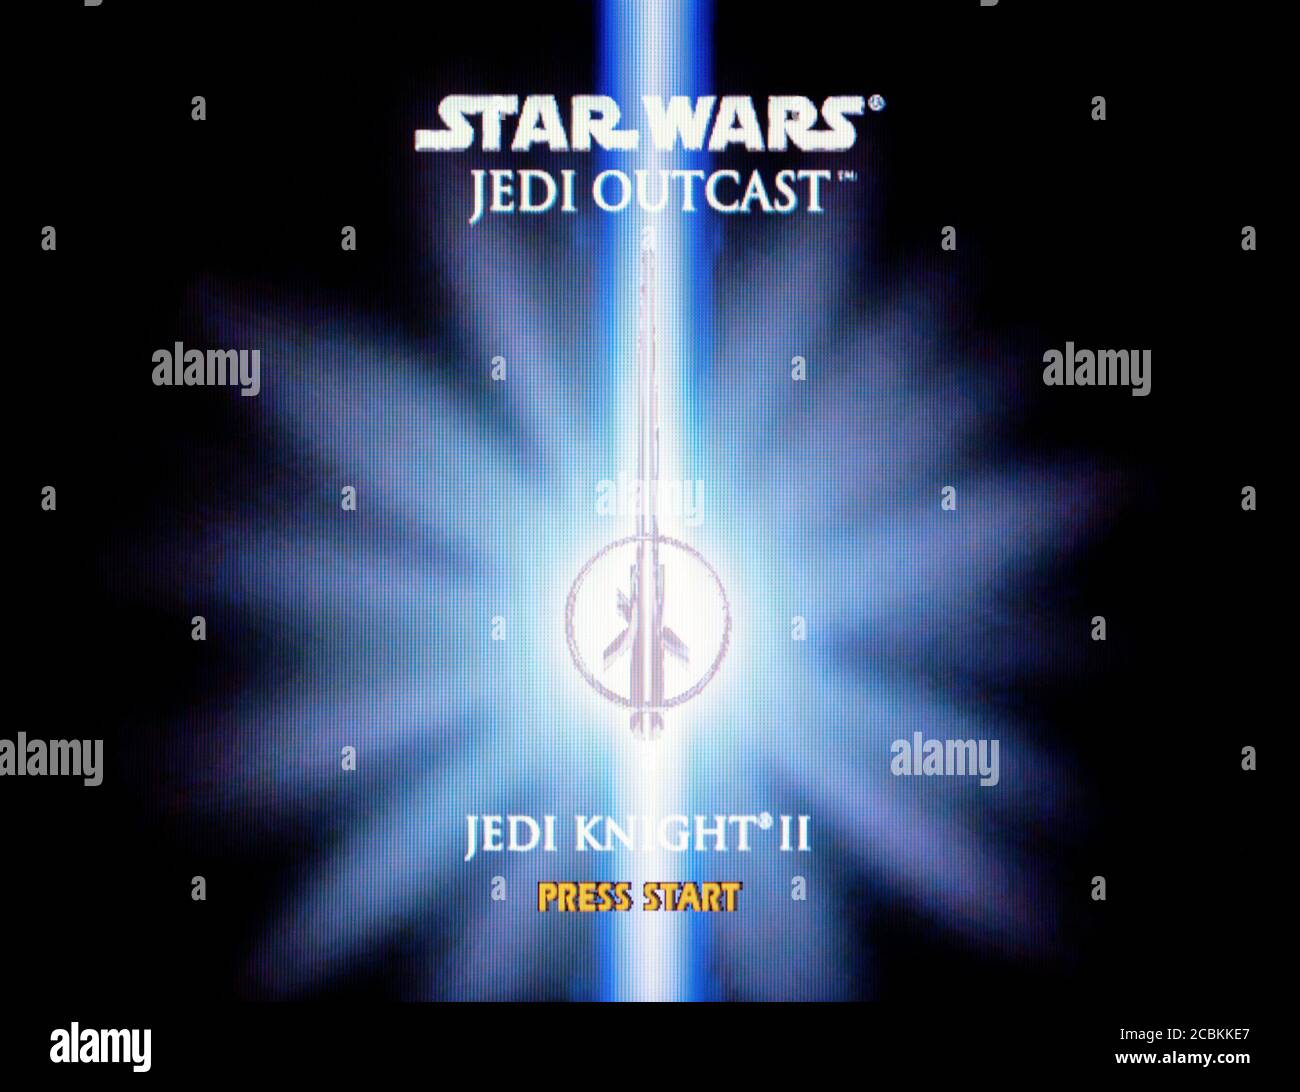 Star Wars Jedi Outcast - Nintendo Gamecube Videogame - Editorial use only Stock Photo